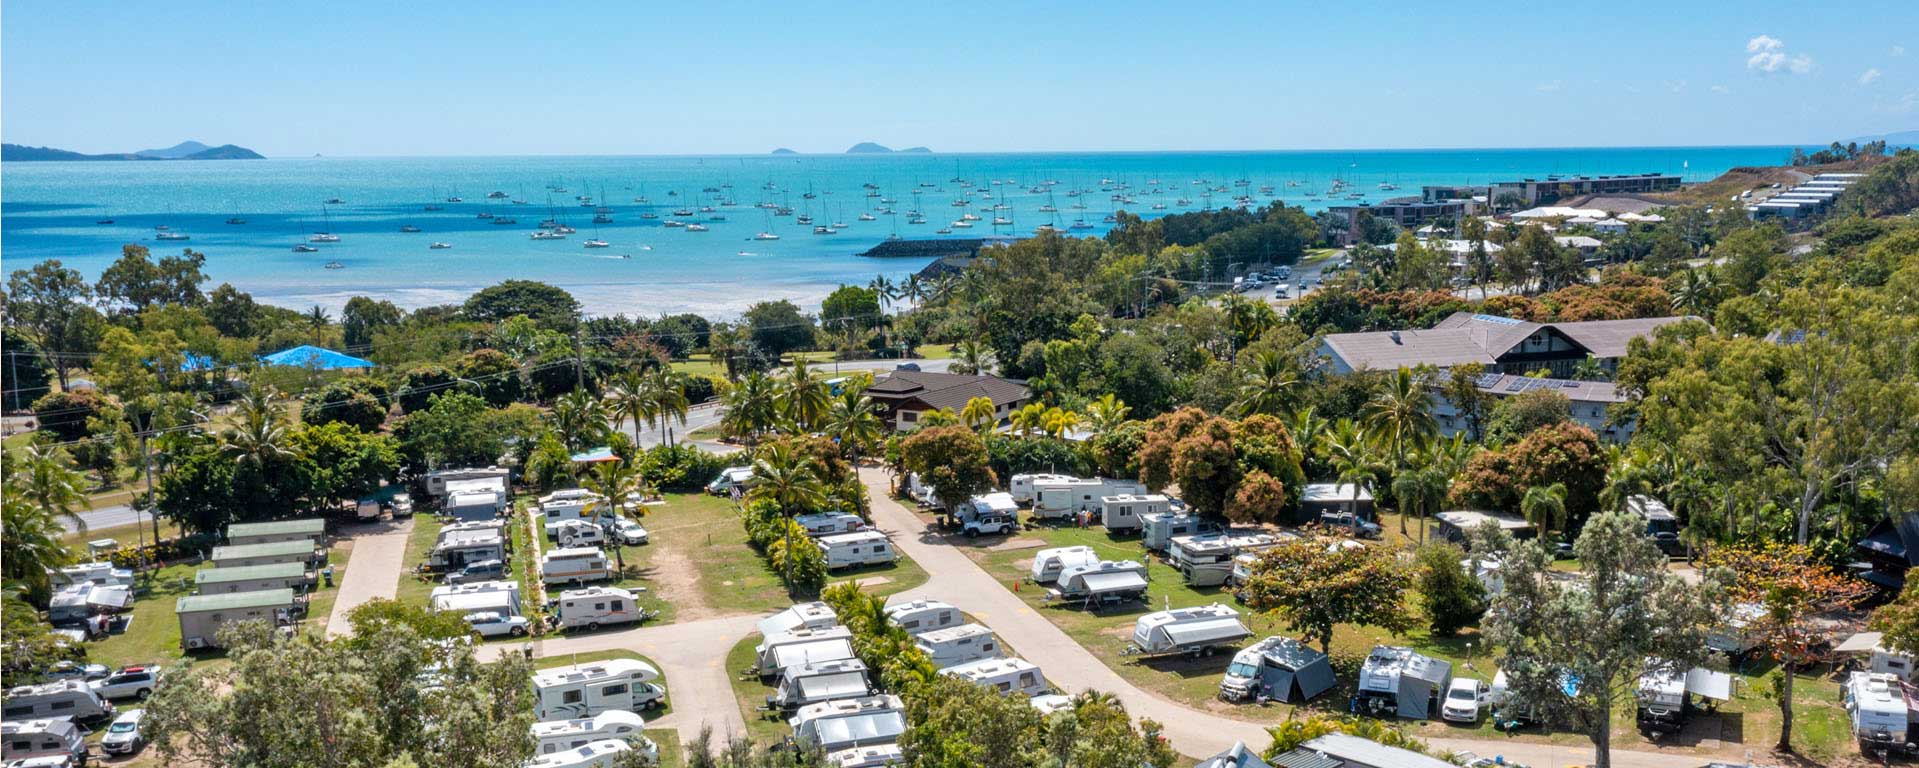 NMRA Airlie Beach Holiday Park is one of the pet friendly caravan parks in Airlie Beach